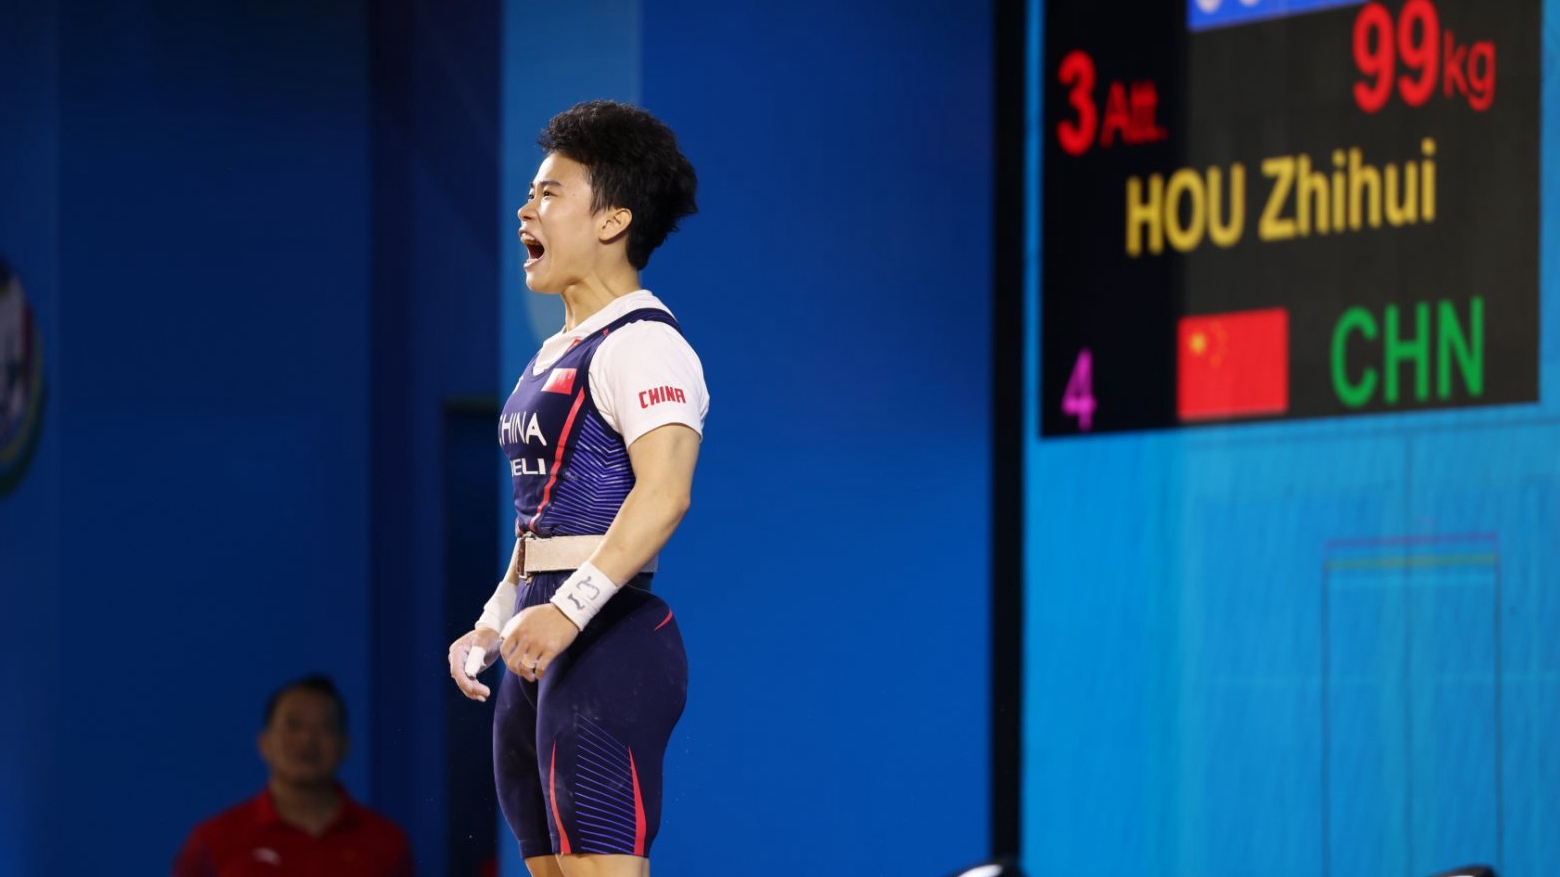 Hou Zhihui breaks weightlifting world record, secures Paris 2024 spot